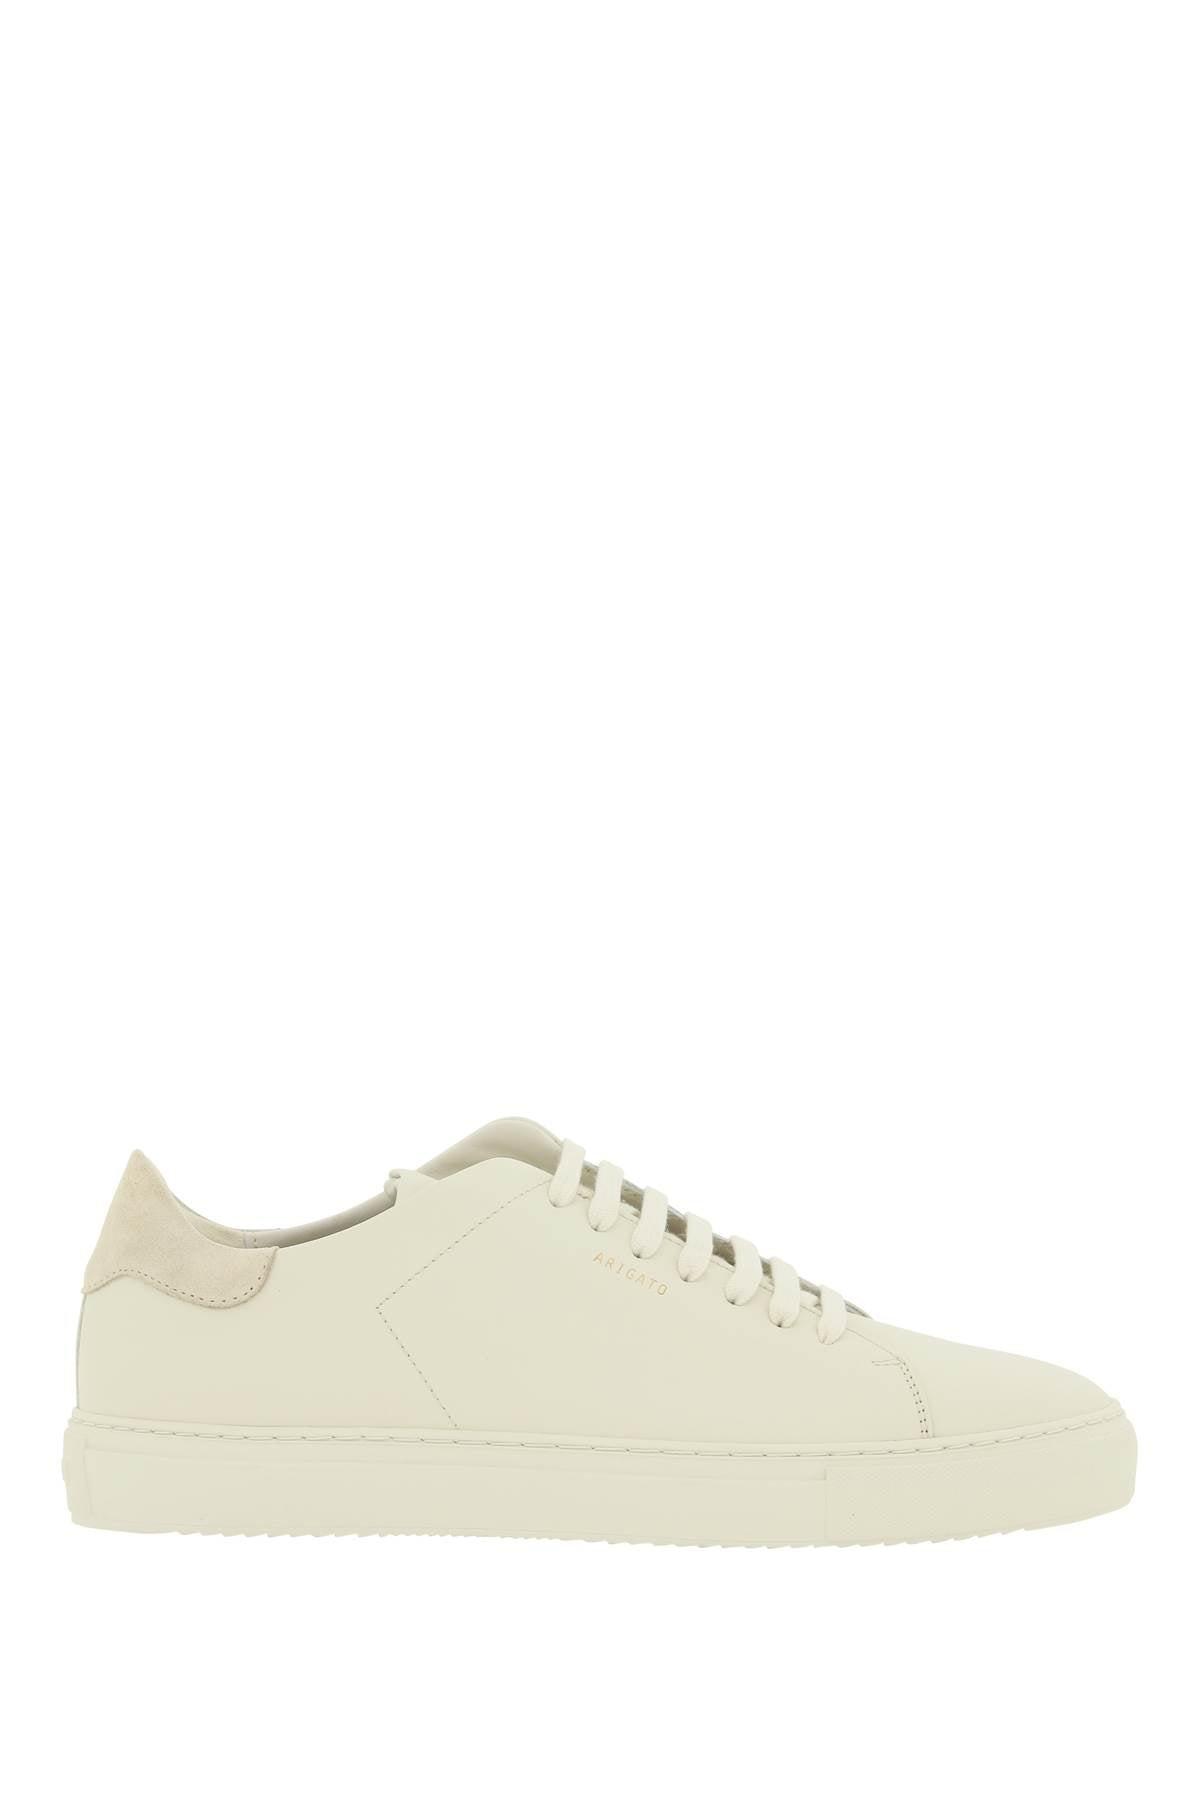 Axel Arigato Clean 90 Leather Sneakers in Natural for Men | Lyst